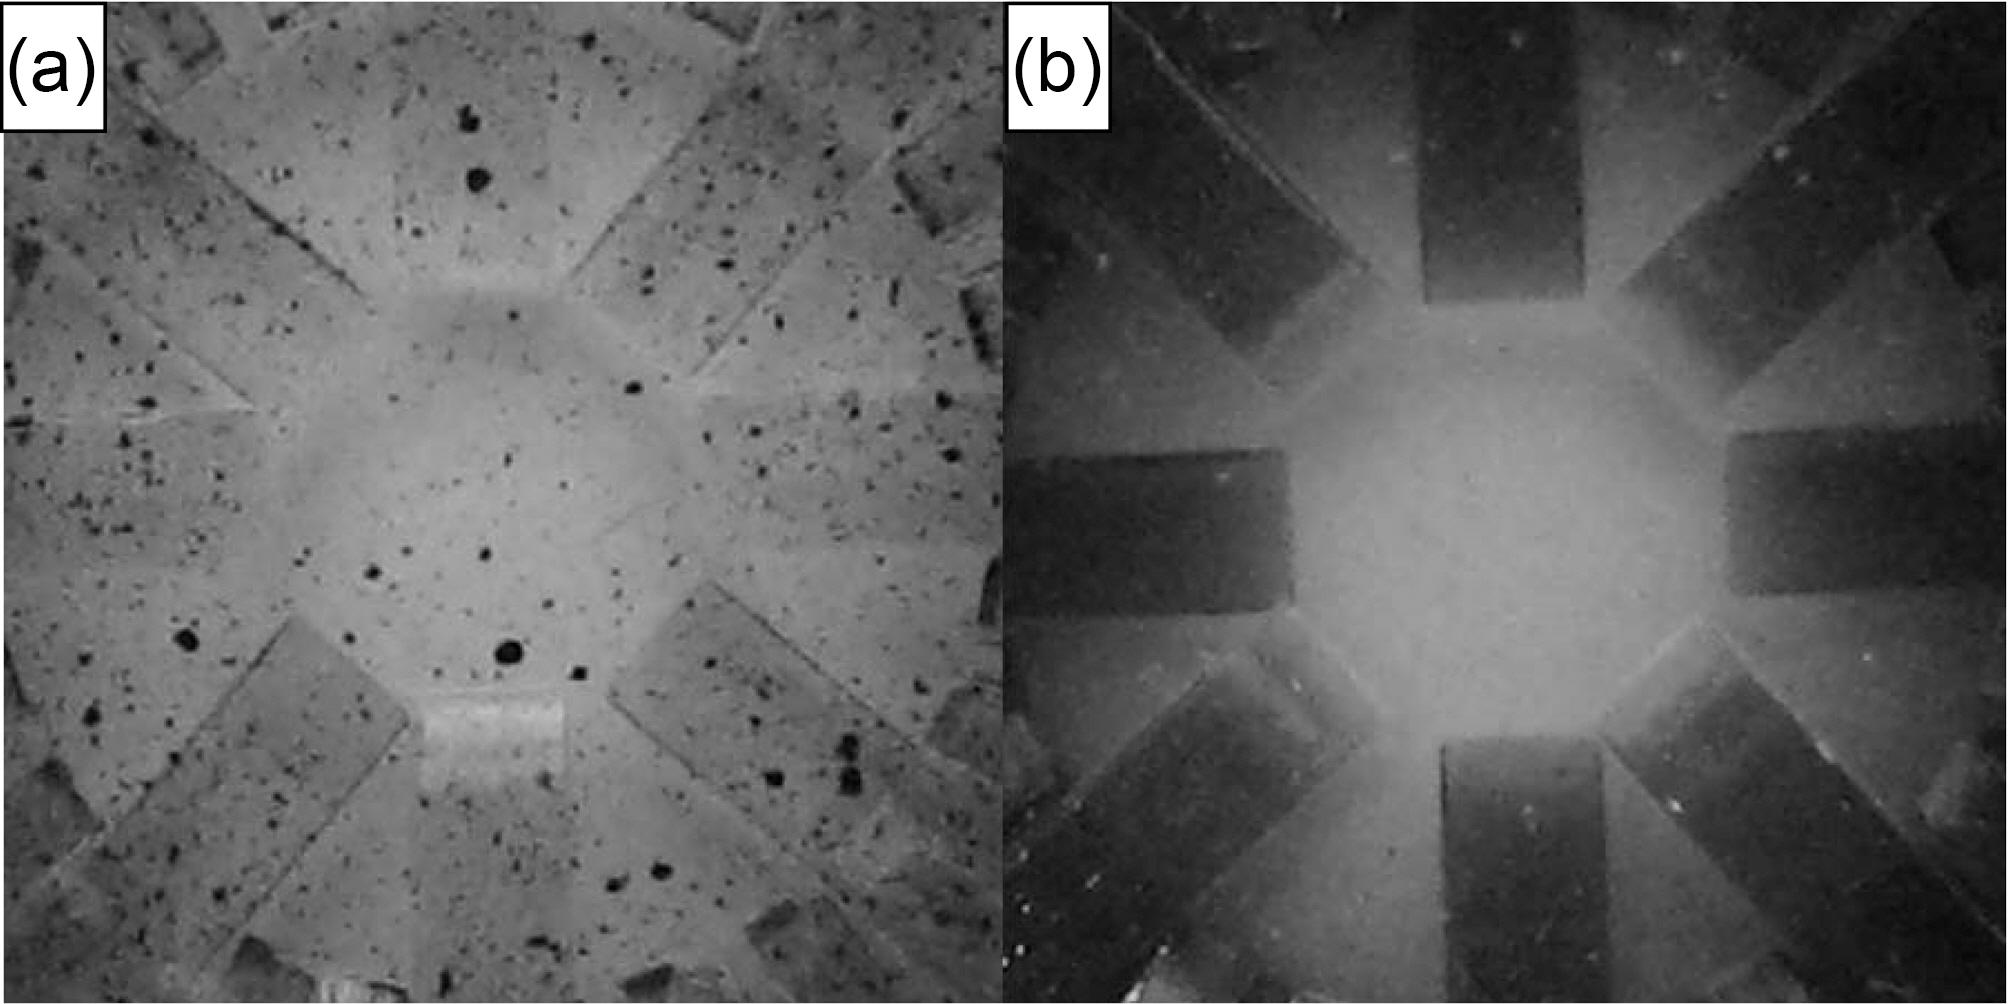 Carbon nanotube dispersion state of (a) raw and (b) masterbatched multiwall carbon nanotube (MWCNT)/poly(dimethylsiloxane) (PDMS) composites at 0.1 phr MWCNT [37].